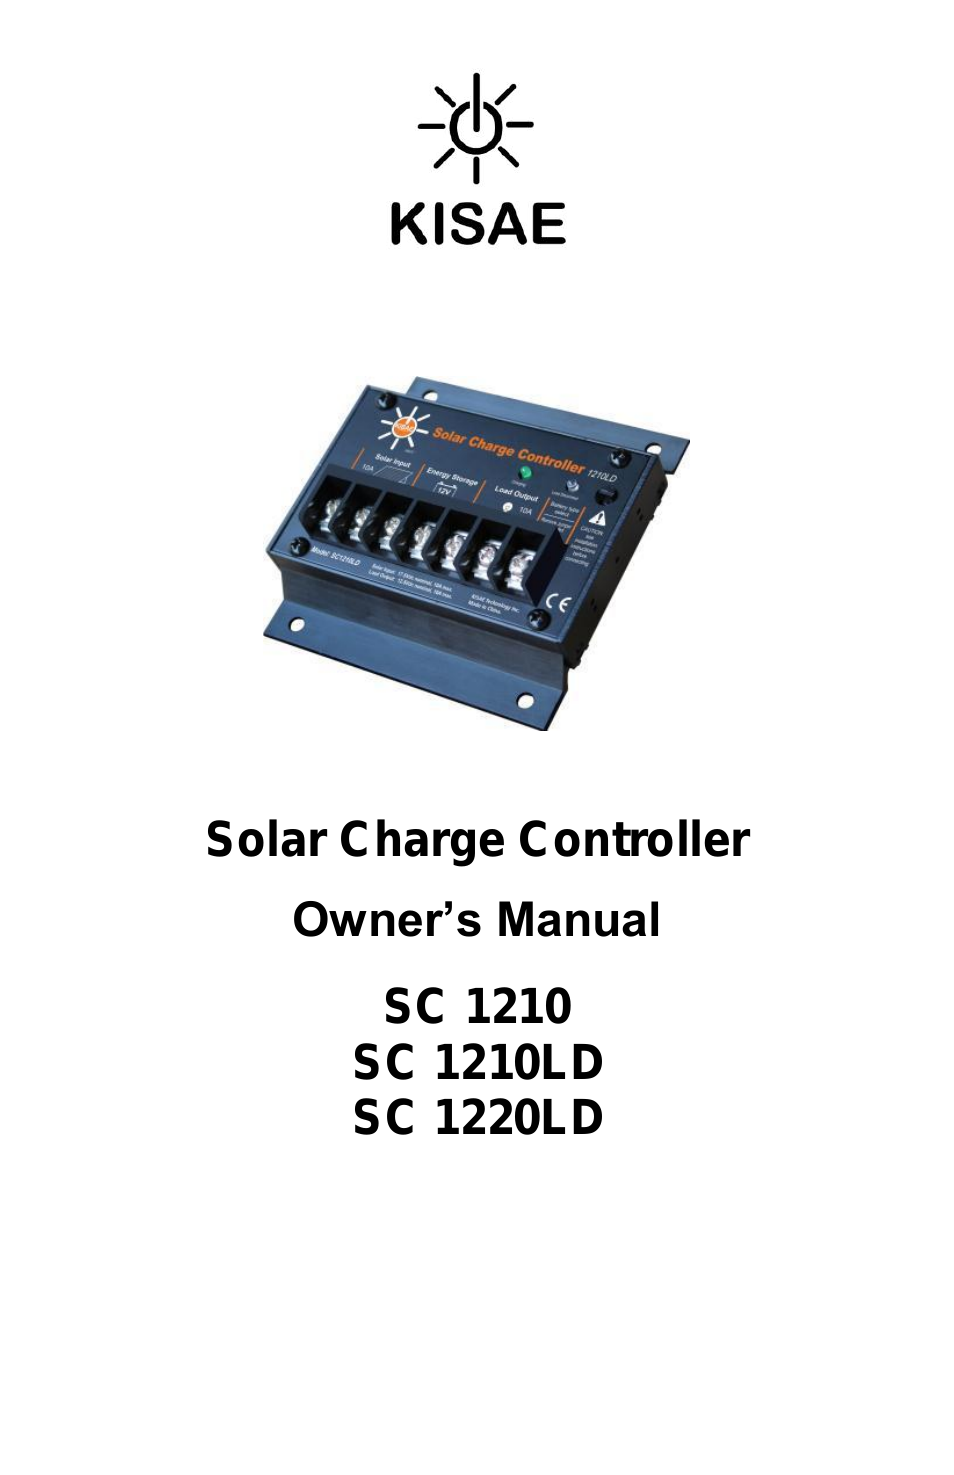 SC 1210LD Solar Charge Controller